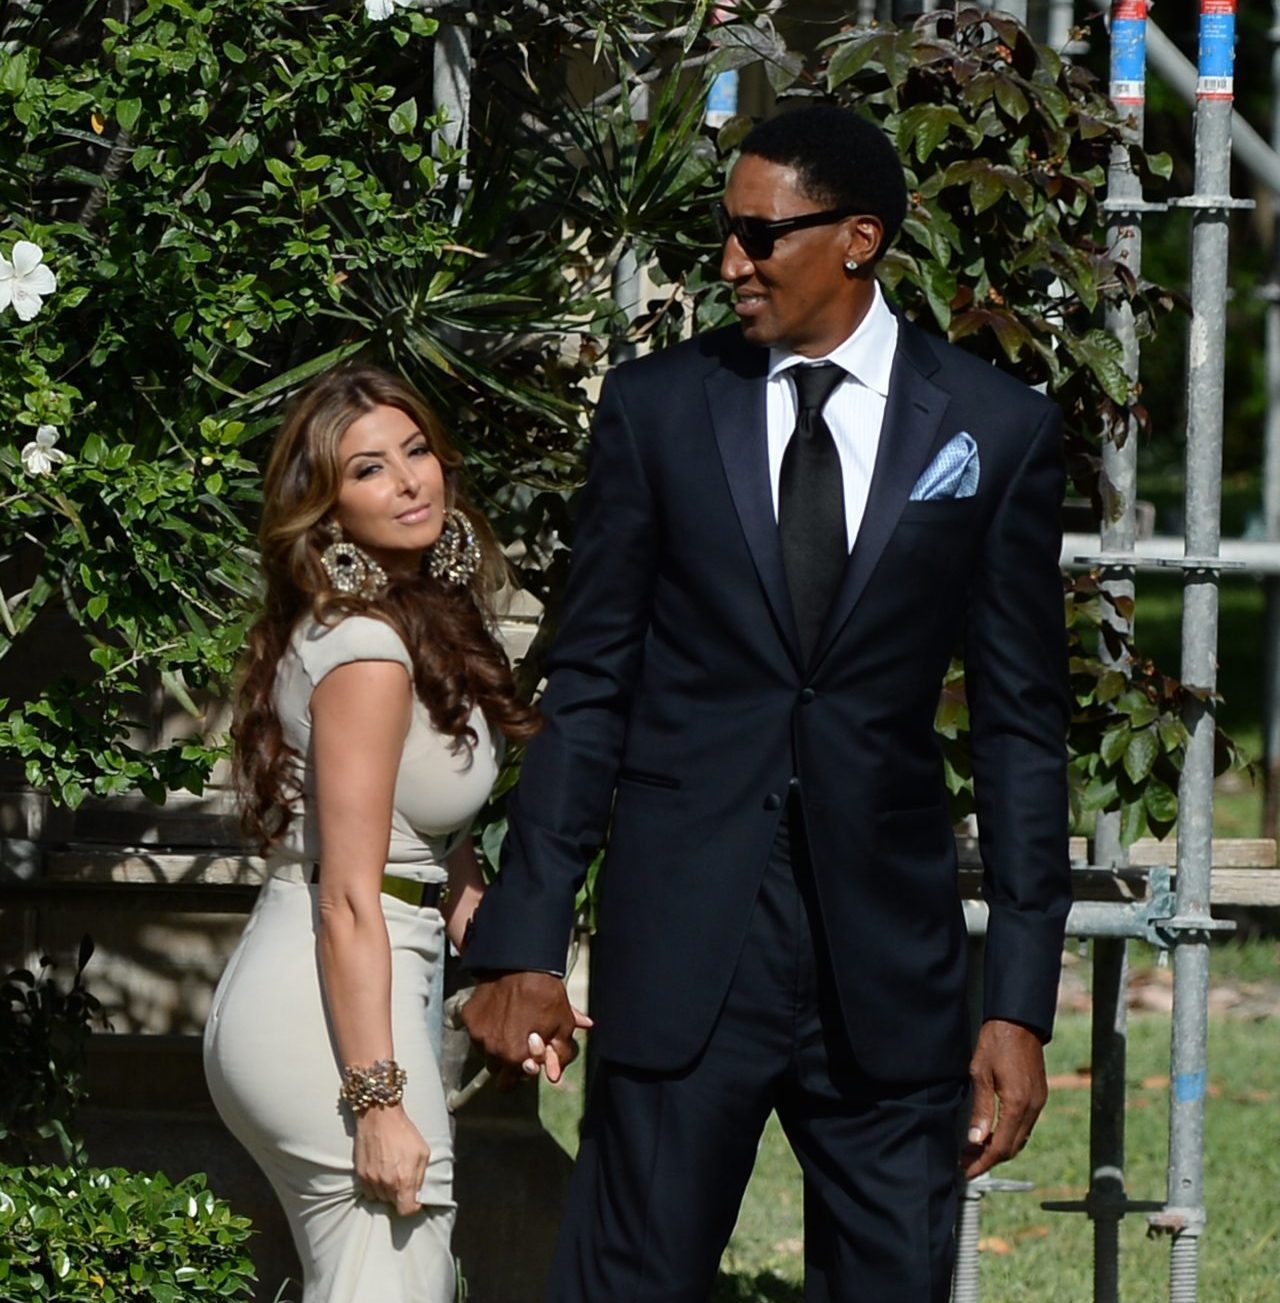 Larsa Pippen Claims She Didn't Know Marcus Jordan Or His Family  While Married To Scottie Pippen